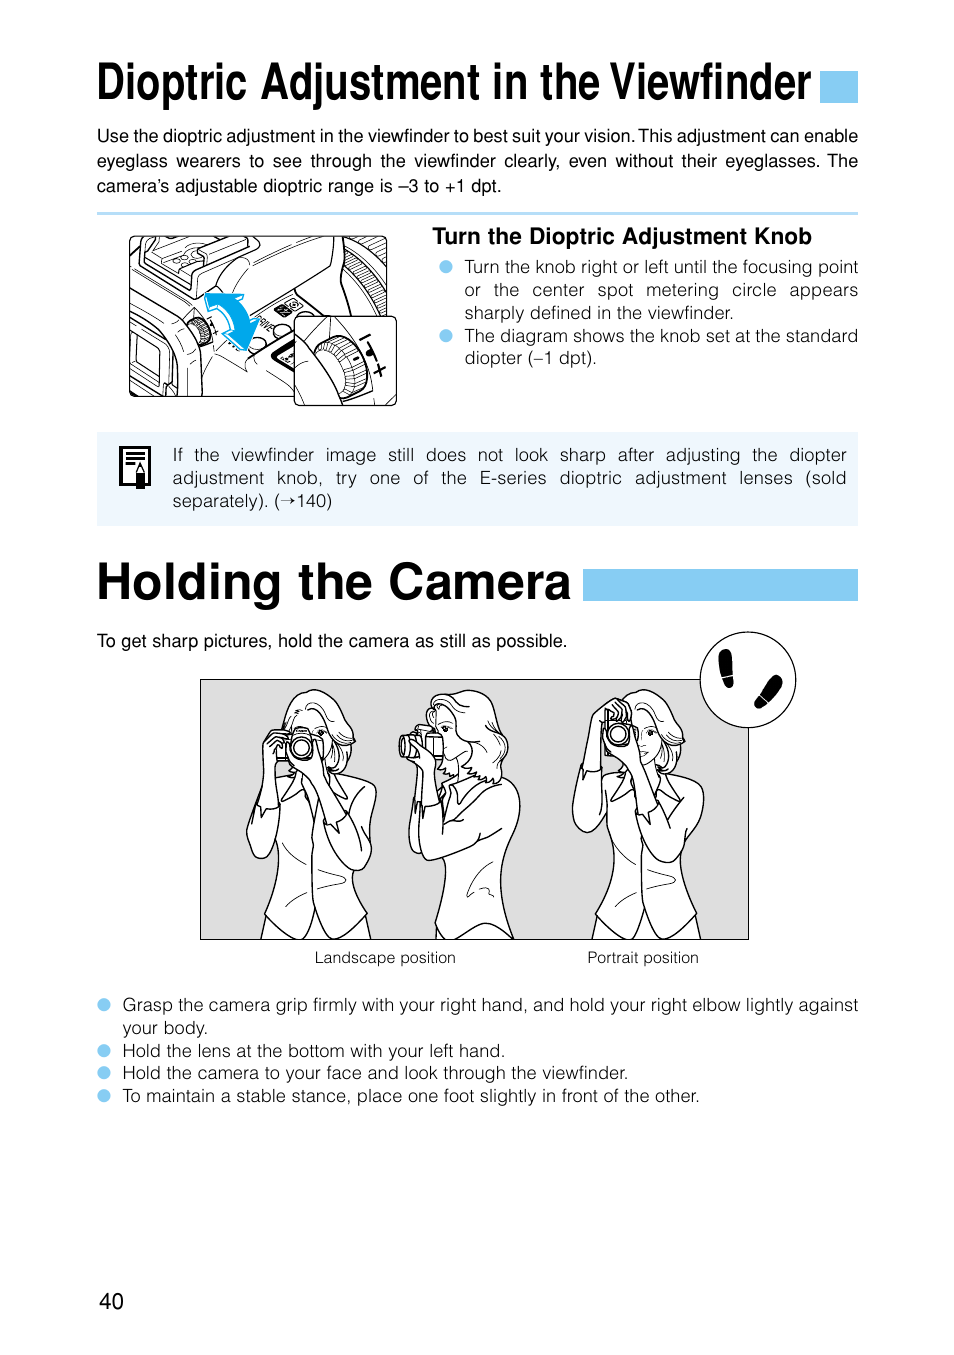 Dioptric adjustment in the viewfinder, Holding the camera | Canon EOS D30 User Manual | Page 40 / 152